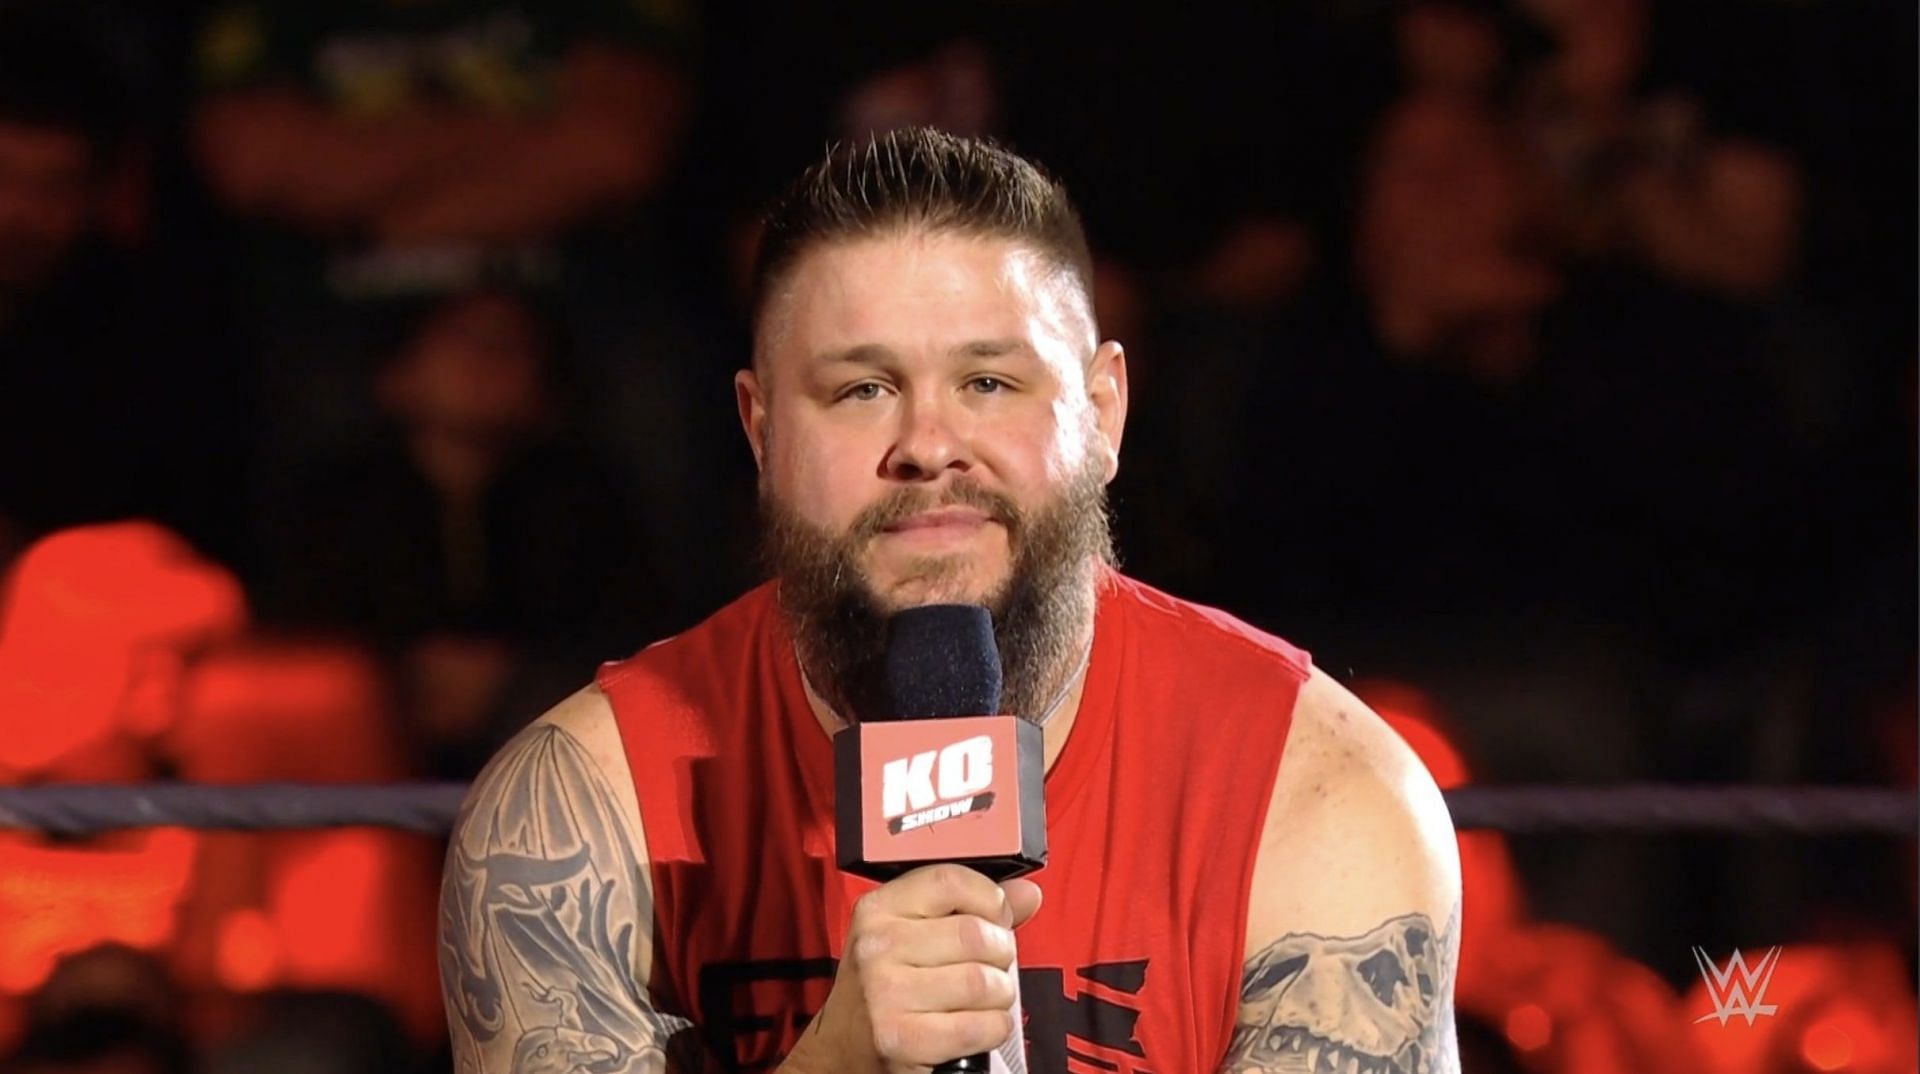 Kevin Owens always delivers on the mic and would do so behind the announce desk.